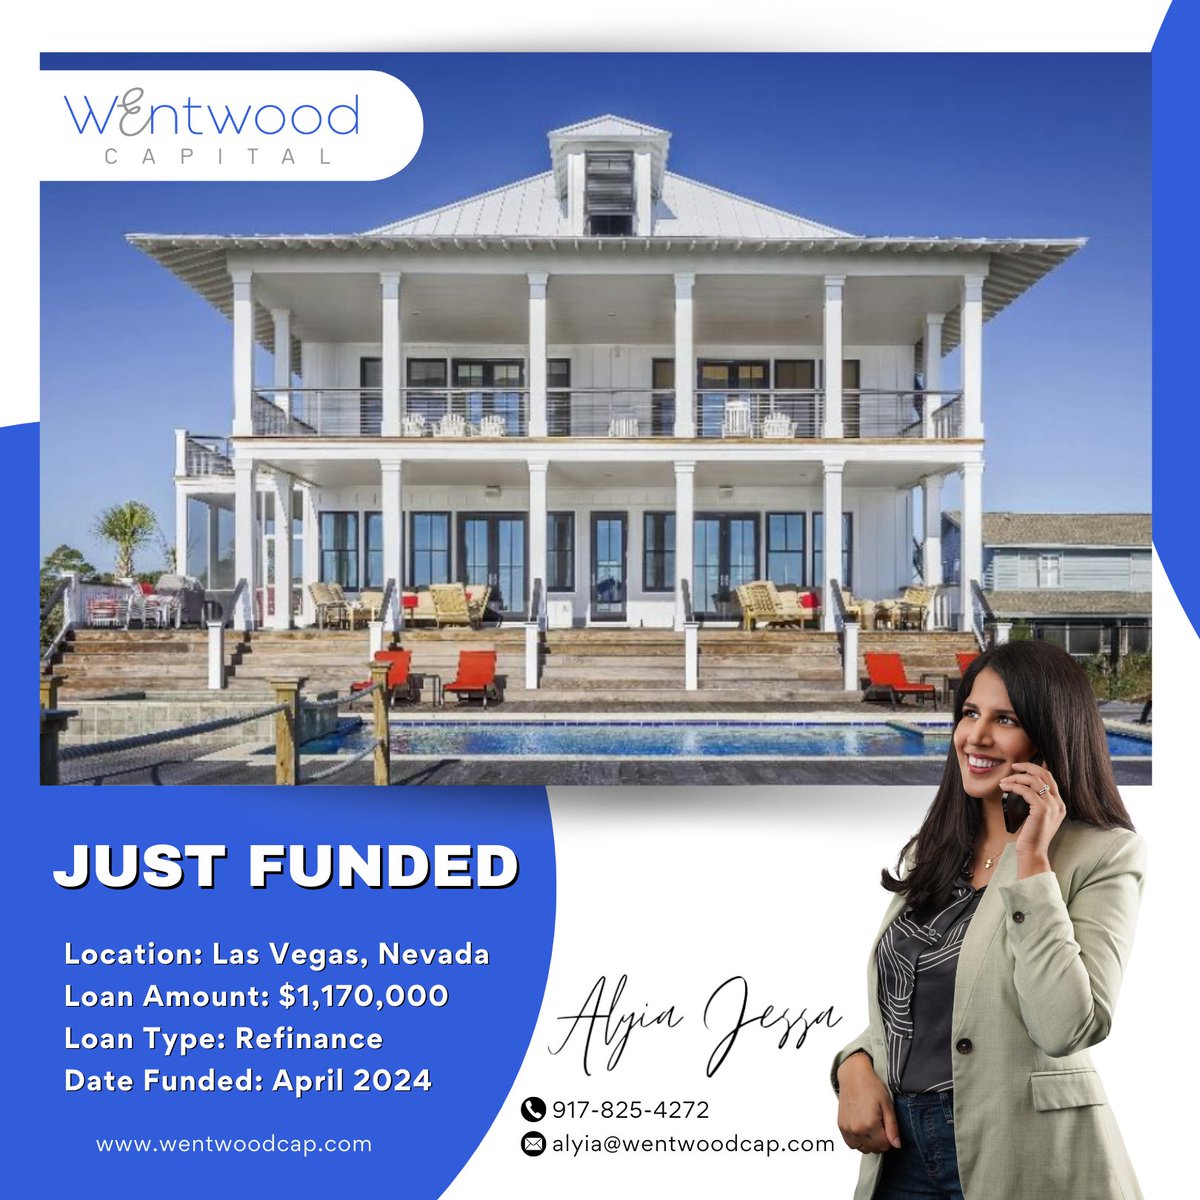 Another exciting milestone achieved! 

Thrilled to announce the successful closing of a $1,170,000 refinance loan in vibrant Las Vegas.

#hardmoneylending #realestate #justfunded #balancesheetlender #refinance #privatelending #cashoutrefi #hardmoneylenders #wentwoodcapital